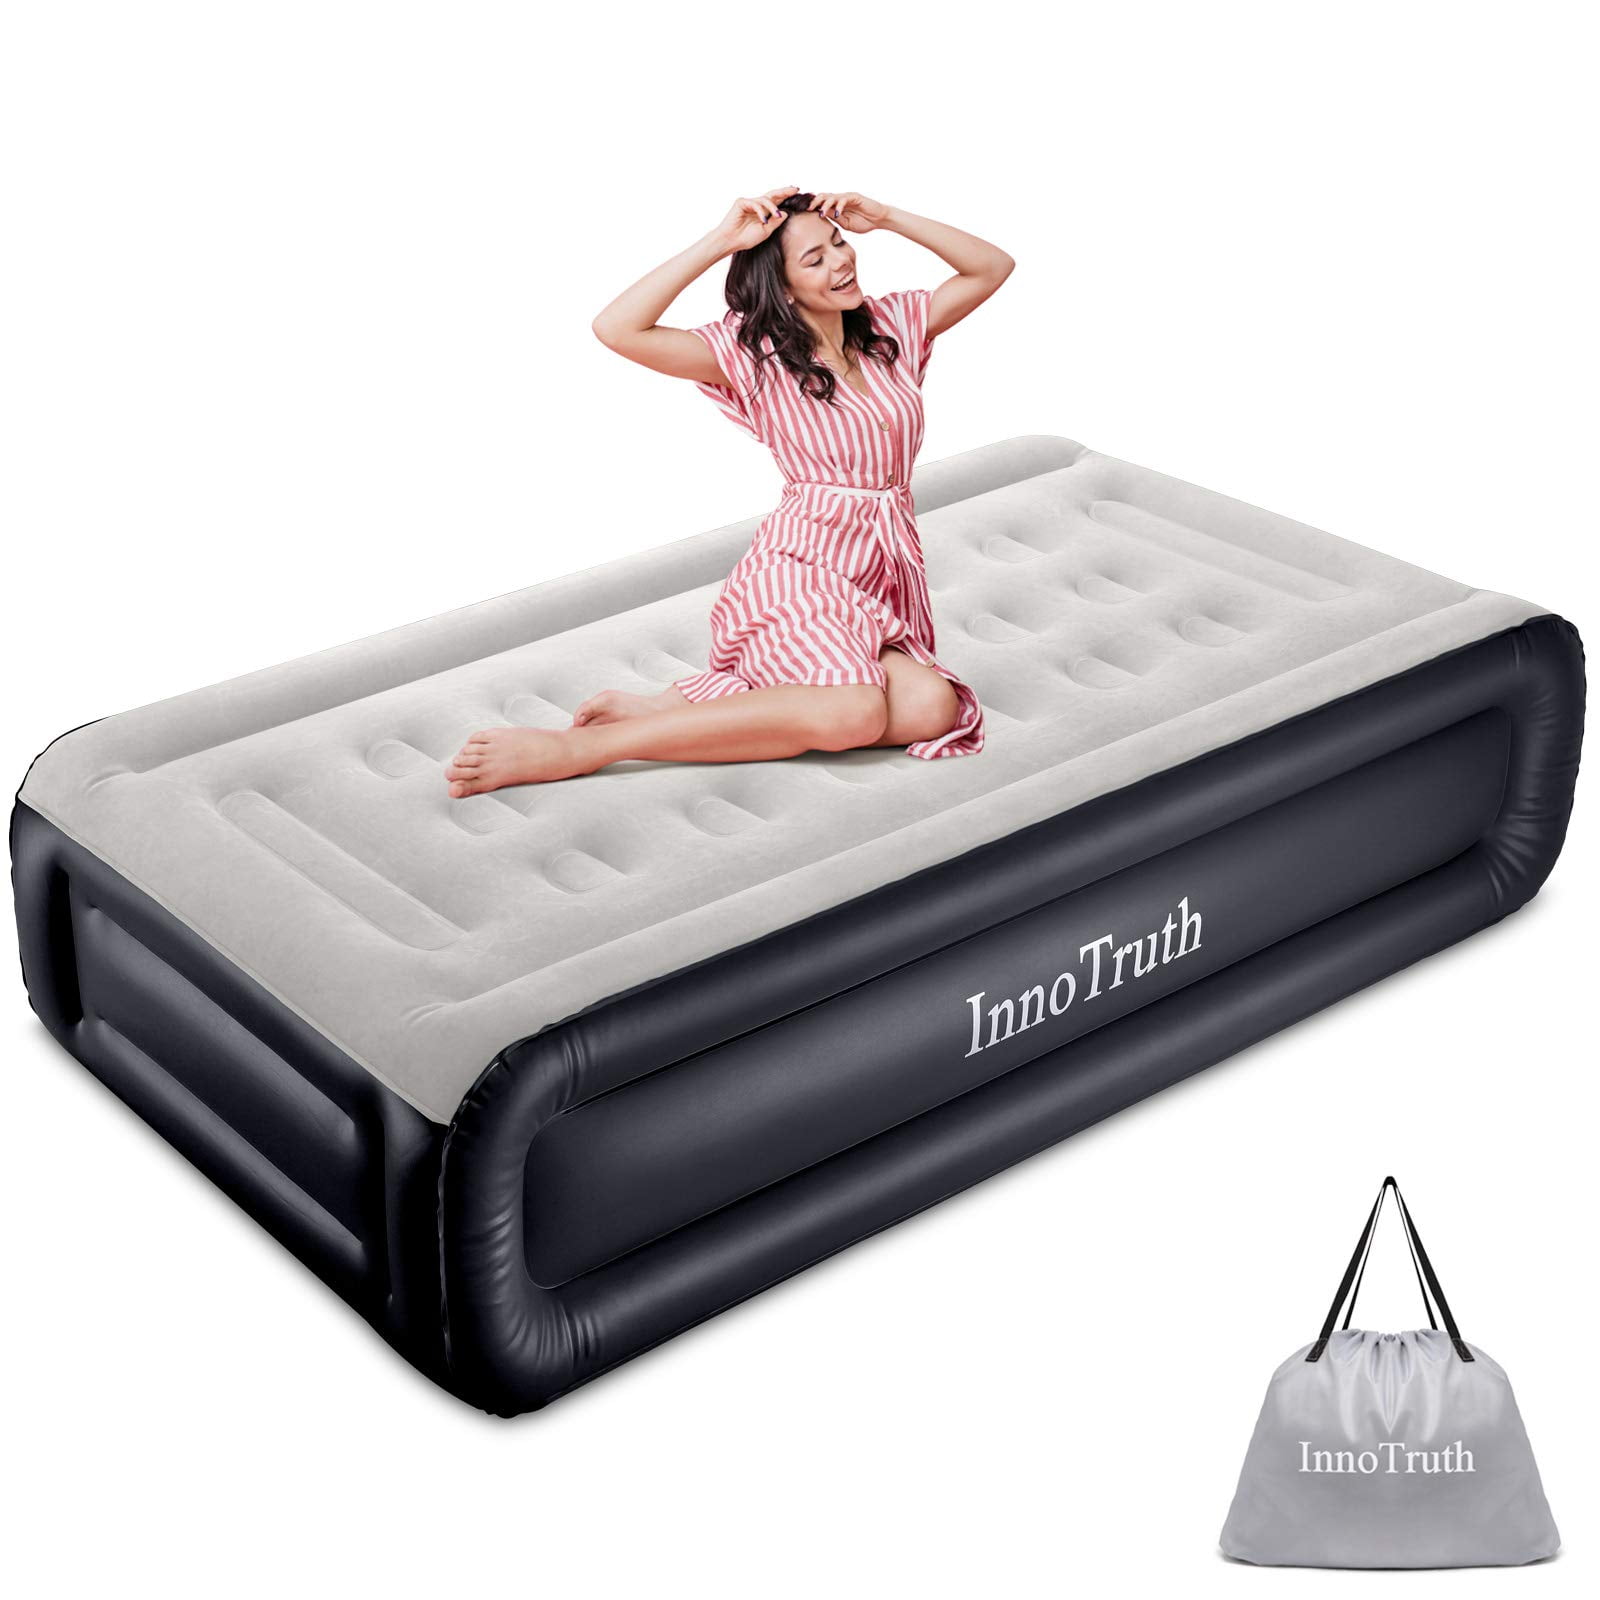 ALTIMAIR AATF0701NP FULL SIZE PVC INFLATABLE AIR BED MATTRESSES BLUE 3-PACK 